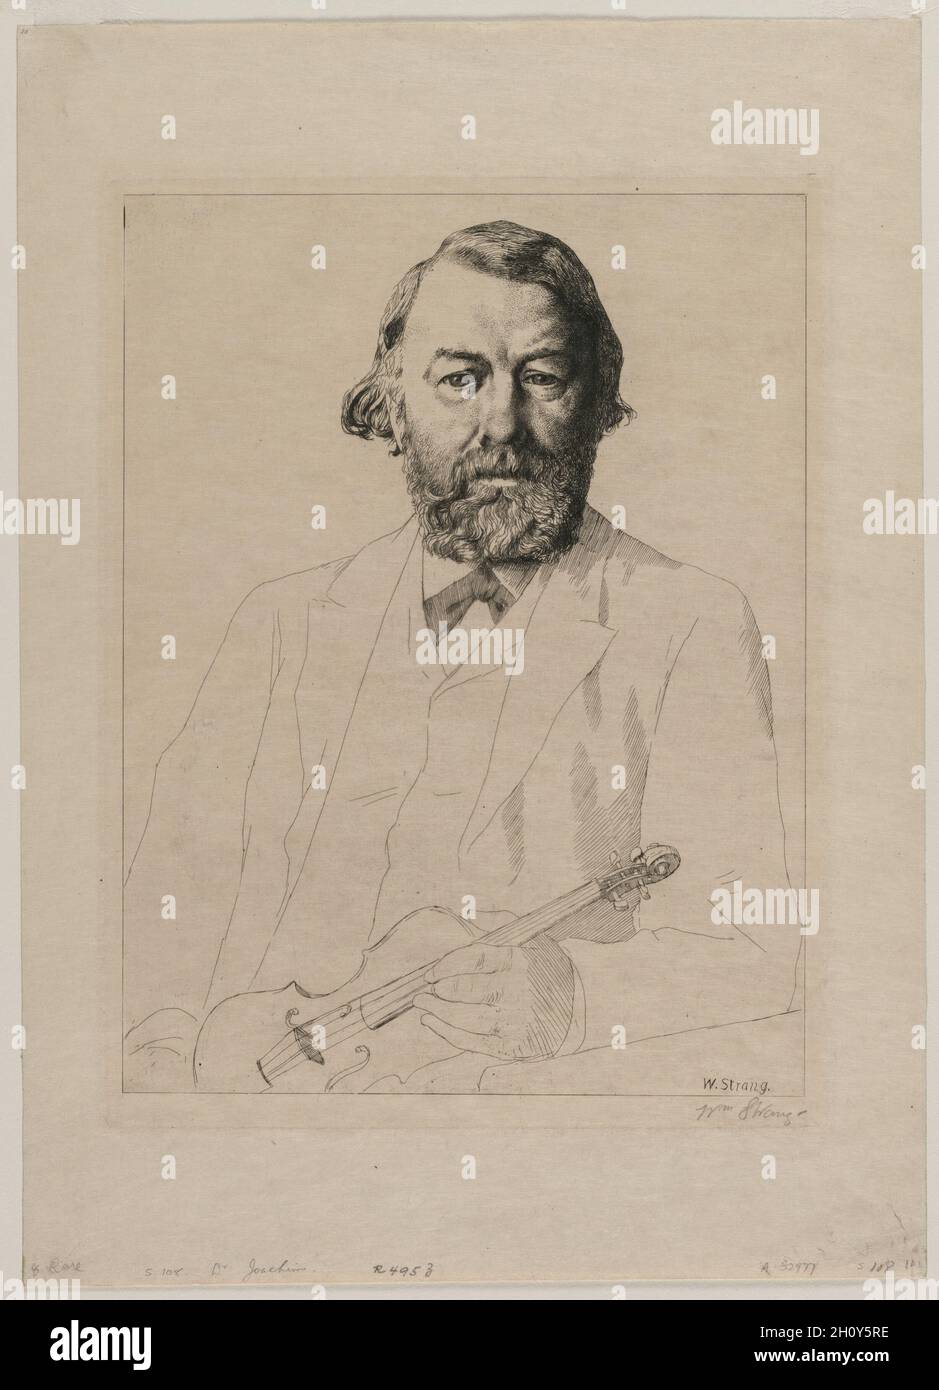 Dr. Joachim, 1887. William Strang (British, 1859-1921). Etching;  Joseph Joachim, a Hungarian violinist, conductor, and composer, was widely regarded as one of the most significant violinists of the 19th century. A protégé of Felix Mendelssohn, Joachim later served Franz Liszt as concertmaster. He was a close friend of Johannes Brahms and Robert Schumann, and frequently performed with Clara Schumann. Stock Photo